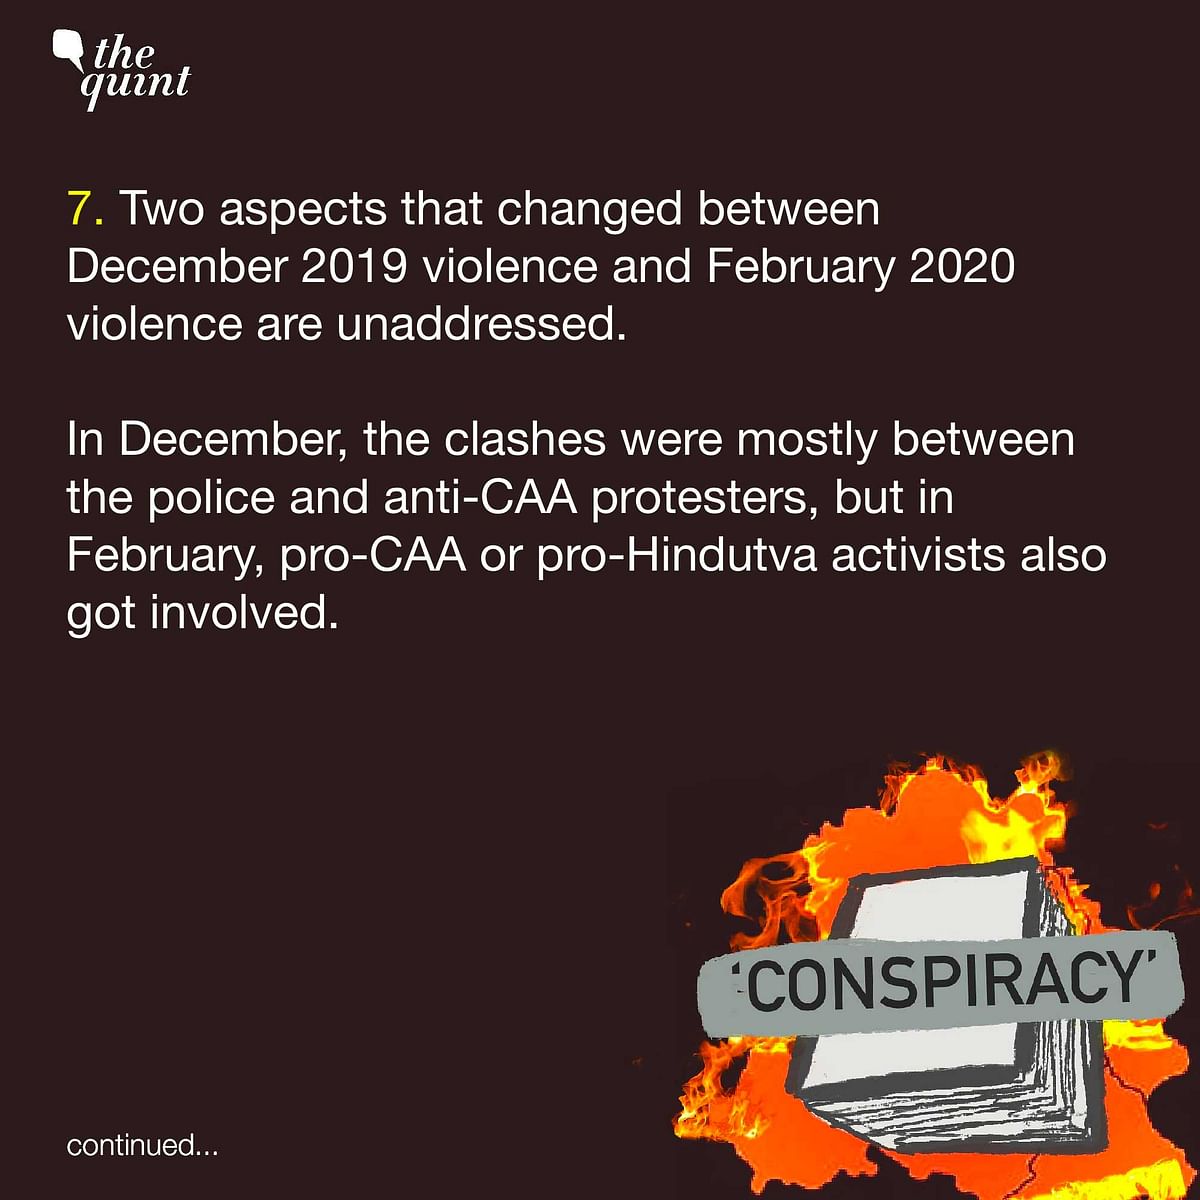 The 8 January meeting has mysteriously vanished and the link between Chakka Jam and communal violence isn’t clear.